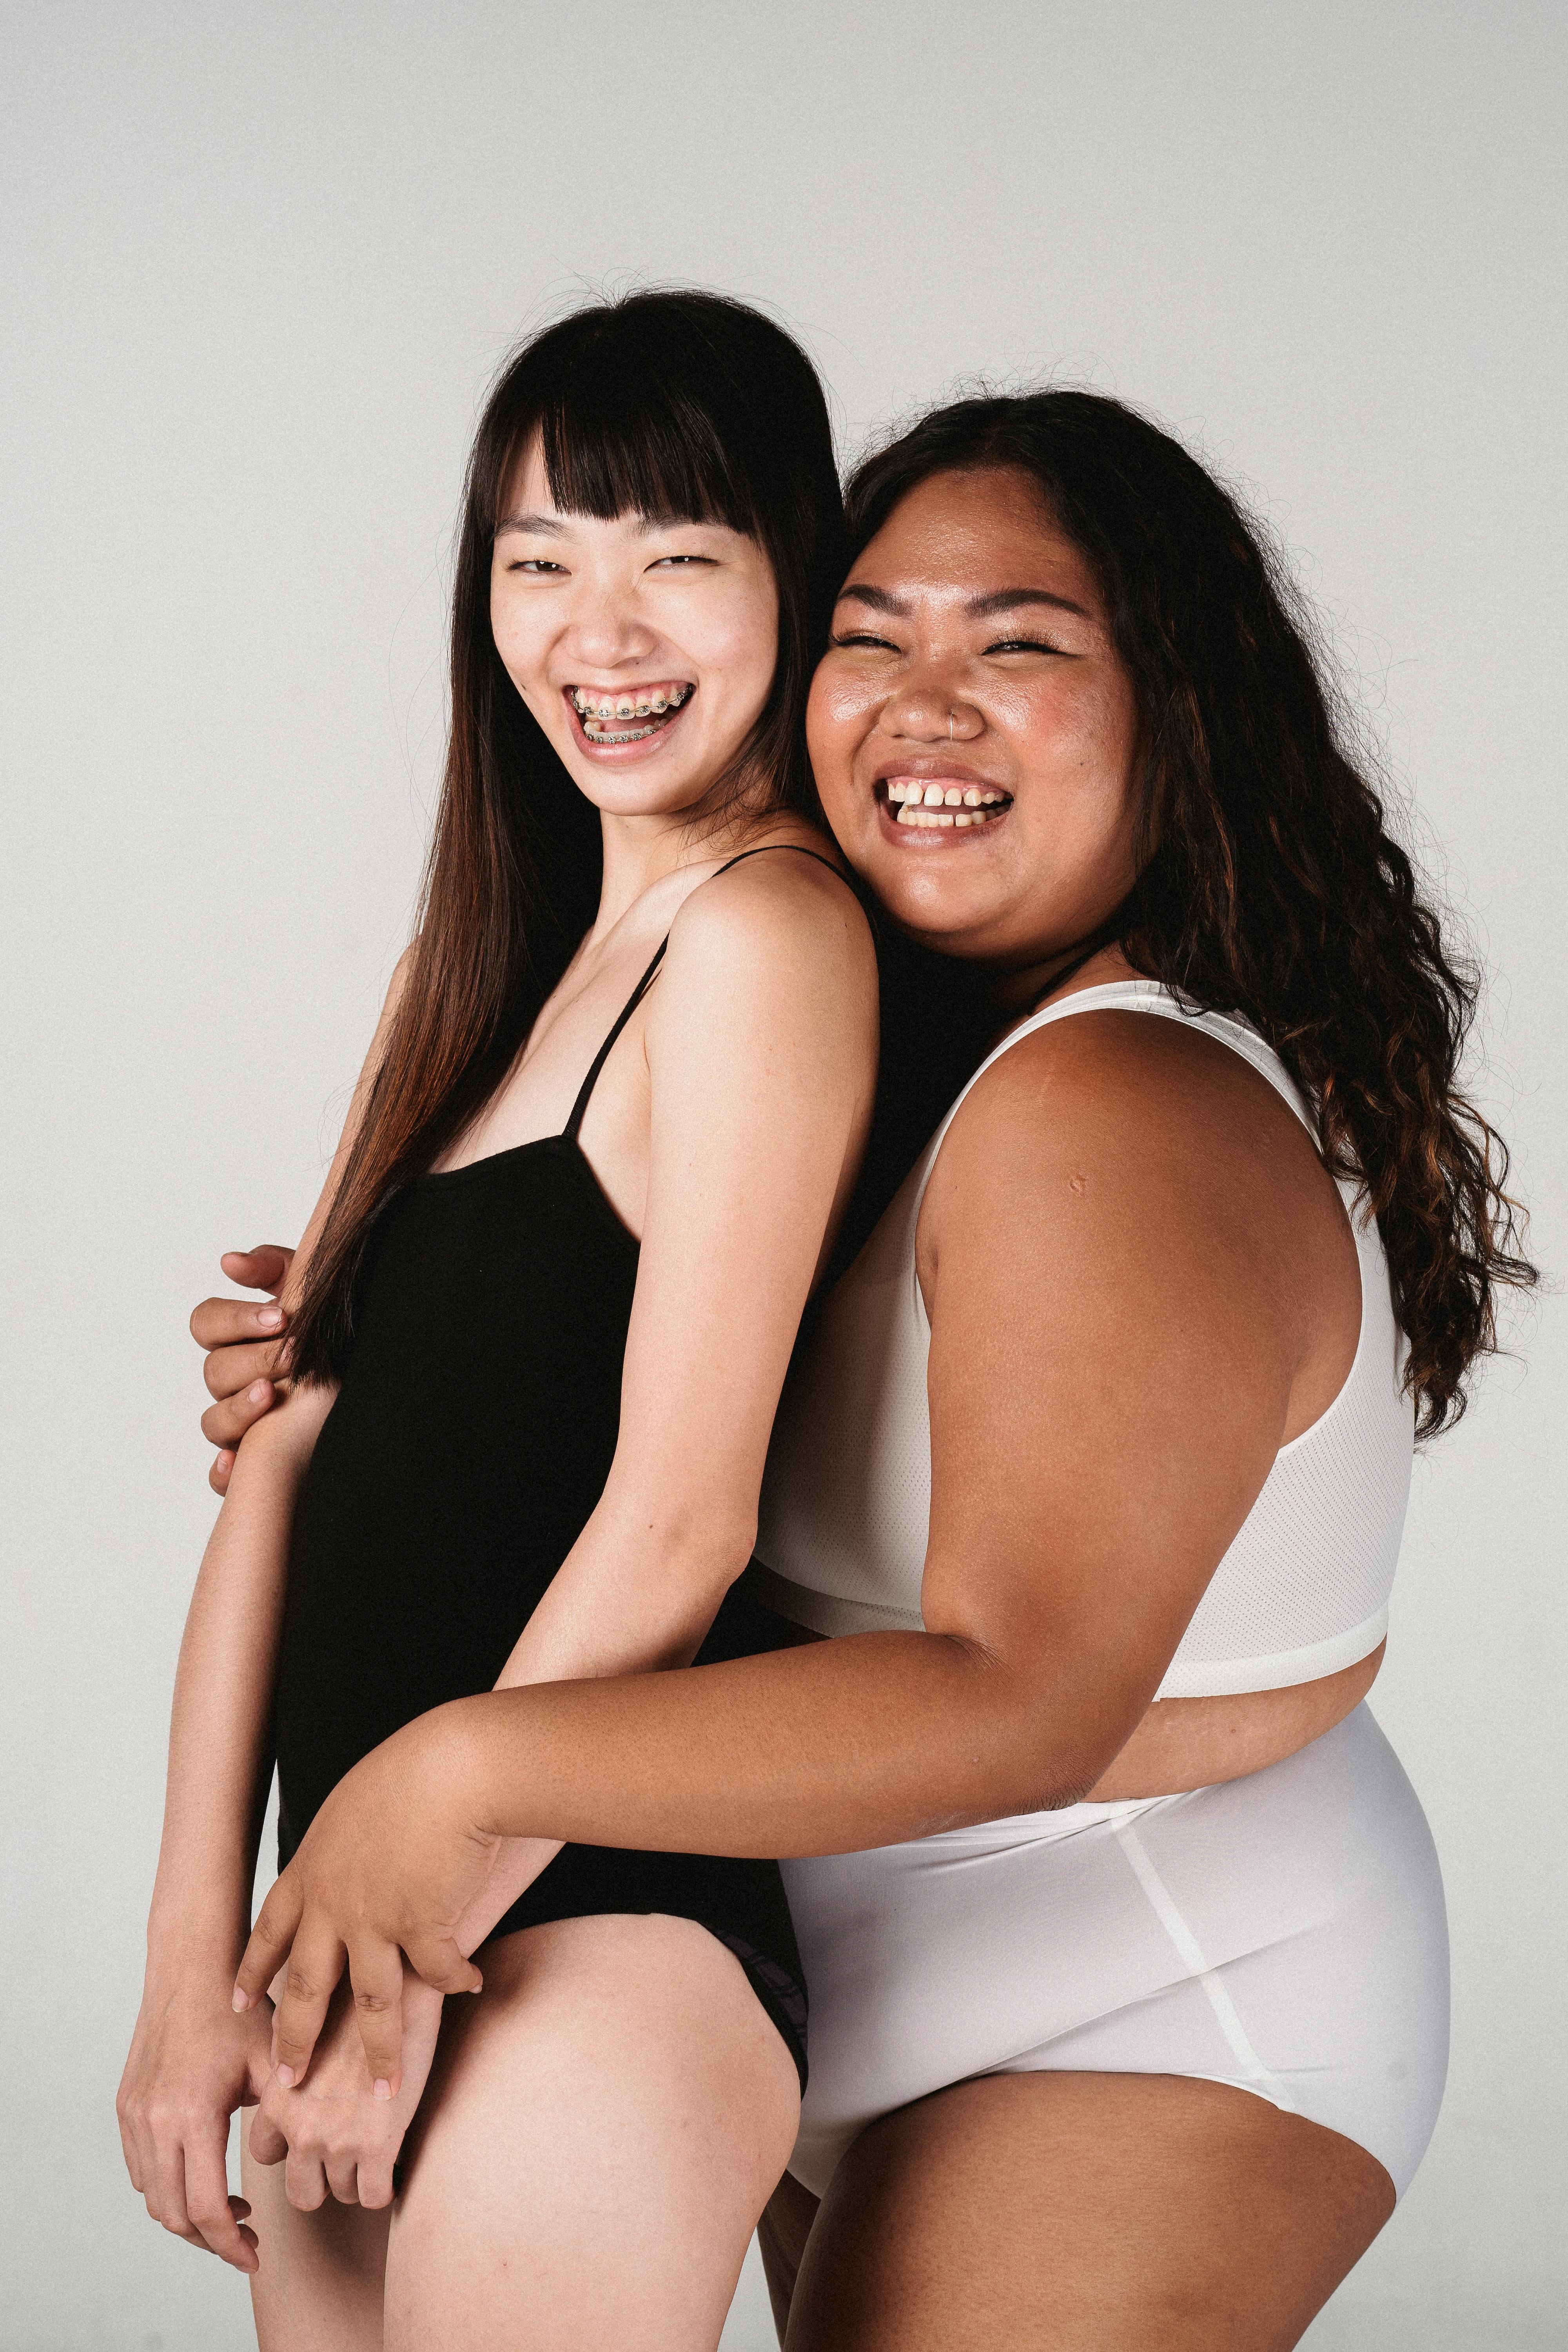 Laughing young Asian girlfriends in underwear cuddling in studio · Free Stock Photo pic picture